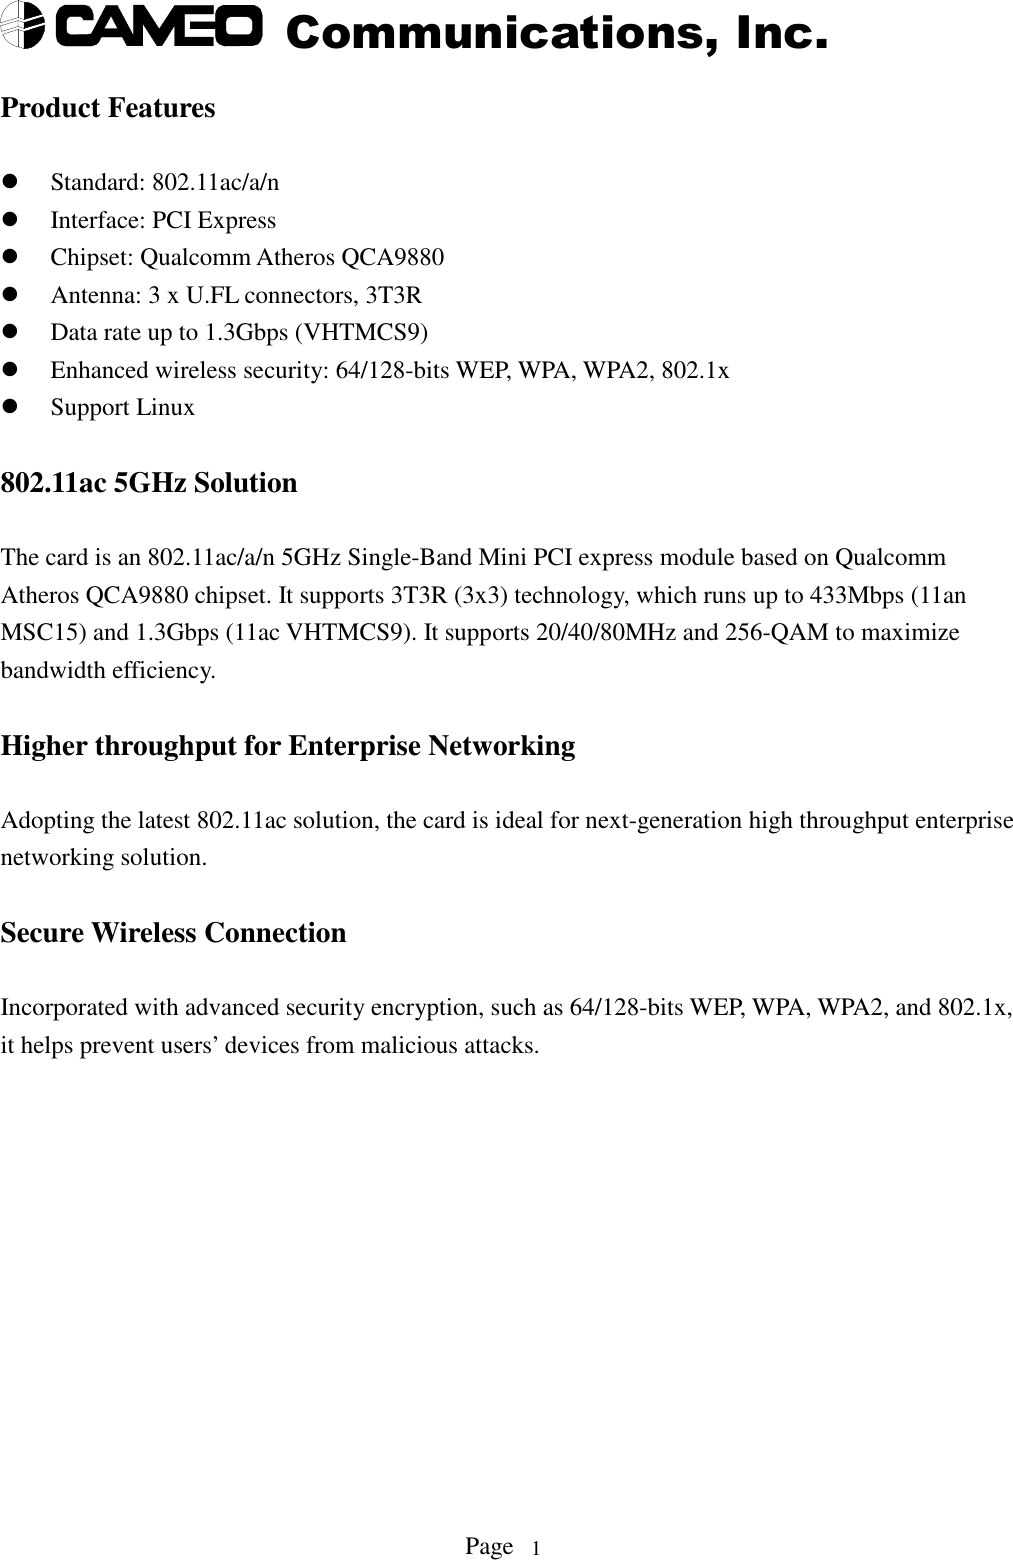 Communications, Inc.Page 1Product FeaturesStandard: 802.11ac/a/nInterface: PCI ExpressChipset: Qualcomm Atheros QCA9880Antenna: 3 x U.FL connectors, 3T3RData rate up to 1.3Gbps (VHTMCS9)Enhanced wireless security: 64/128-bits WEP, WPA, WPA2, 802.1xSupport Linux802.11ac 5GHz SolutionThe card is an 802.11ac/a/n 5GHz Single-Band Mini PCI express module based on QualcommAtheros QCA9880 chipset. It supports 3T3R (3x3) technology, which runs up to 433Mbps (11anMSC15) and 1.3Gbps (11ac VHTMCS9). It supports 20/40/80MHz and 256-QAM to maximizebandwidth efficiency.Higher throughput for Enterprise NetworkingAdopting the latest 802.11ac solution, the card is ideal for next-generation high throughput enterprisenetworking solution.Secure Wireless ConnectionIncorporated with advanced security encryption, such as 64/128-bits WEP, WPA, WPA2, and 802.1x,it helps prevent users’ devices from malicious attacks.